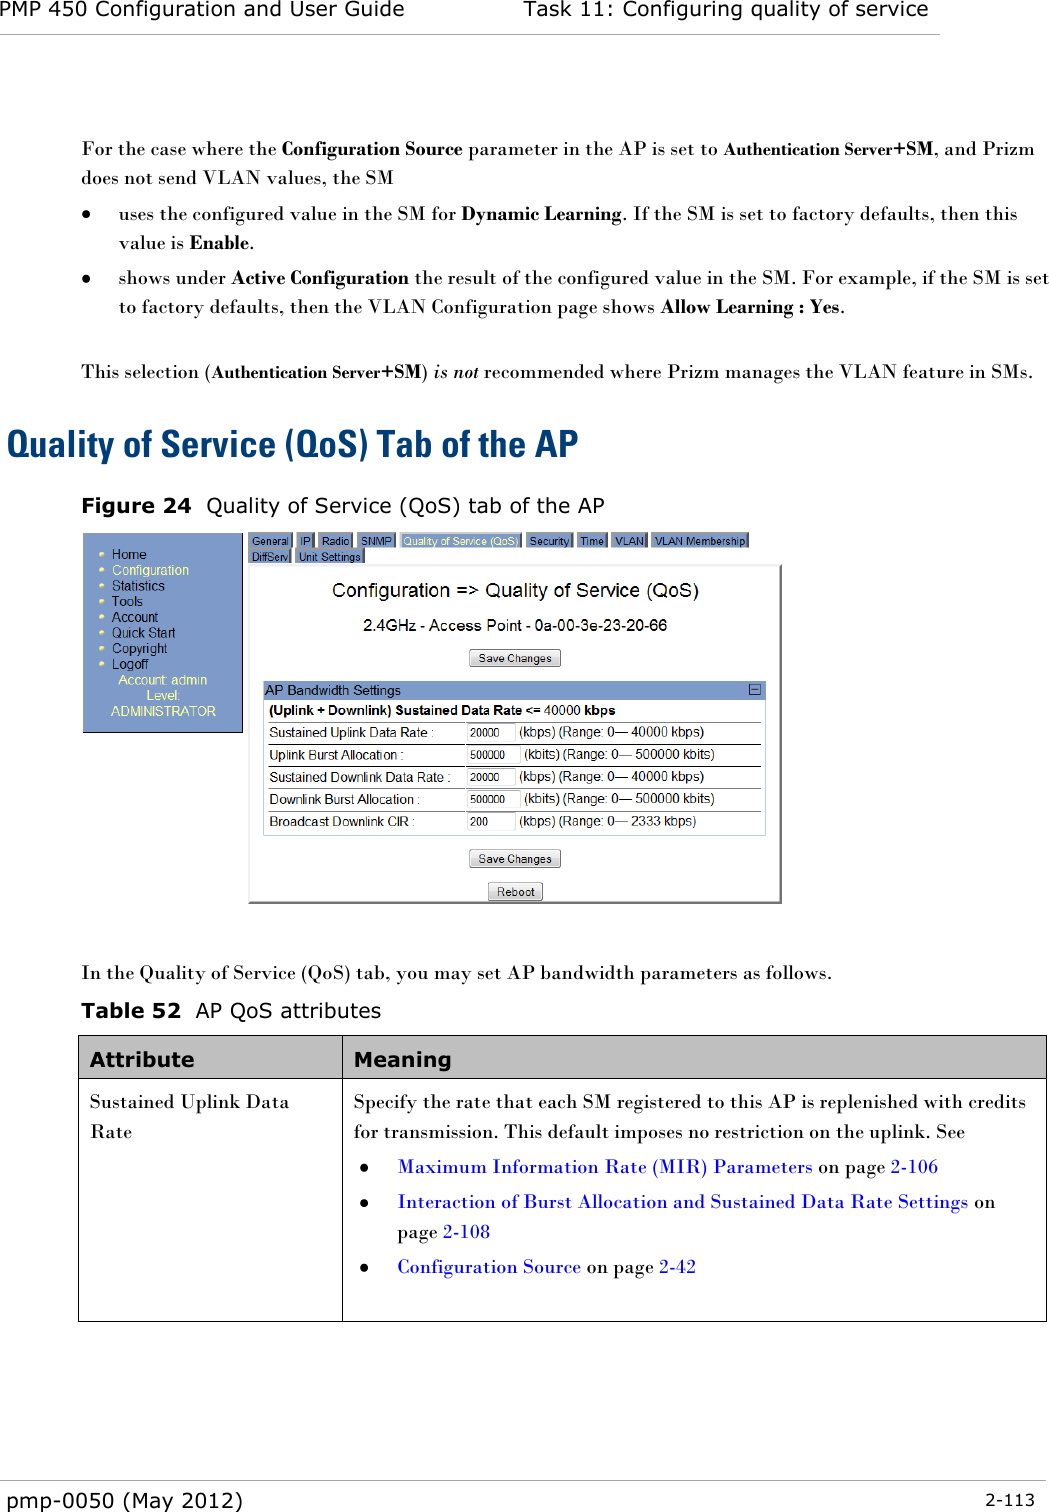 PMP 450 Configuration and User Guide Task 11: Configuring quality of service  pmp-0050 (May 2012)  2-113   For the case where the Configuration Source parameter in the AP is set to Authentication Server+SM, and Prizm does not send VLAN values, the SM   uses the configured value in the SM for Dynamic Learning. If the SM is set to factory defaults, then this value is Enable.  shows under Active Configuration the result of the configured value in the SM. For example, if the SM is set to factory defaults, then the VLAN Configuration page shows Allow Learning : Yes.  This selection (Authentication Server+SM) is not recommended where Prizm manages the VLAN feature in SMs. Quality of Service (QoS) Tab of the AP Figure 24  Quality of Service (QoS) tab of the AP   In the Quality of Service (QoS) tab, you may set AP bandwidth parameters as follows. Table 52  AP QoS attributes Attribute Meaning Sustained Uplink Data Rate  Specify the rate that each SM registered to this AP is replenished with credits for transmission. This default imposes no restriction on the uplink. See   Maximum Information Rate (MIR) Parameters on page 2-106  Interaction of Burst Allocation and Sustained Data Rate Settings on page 2-108  Configuration Source on page 2-42  